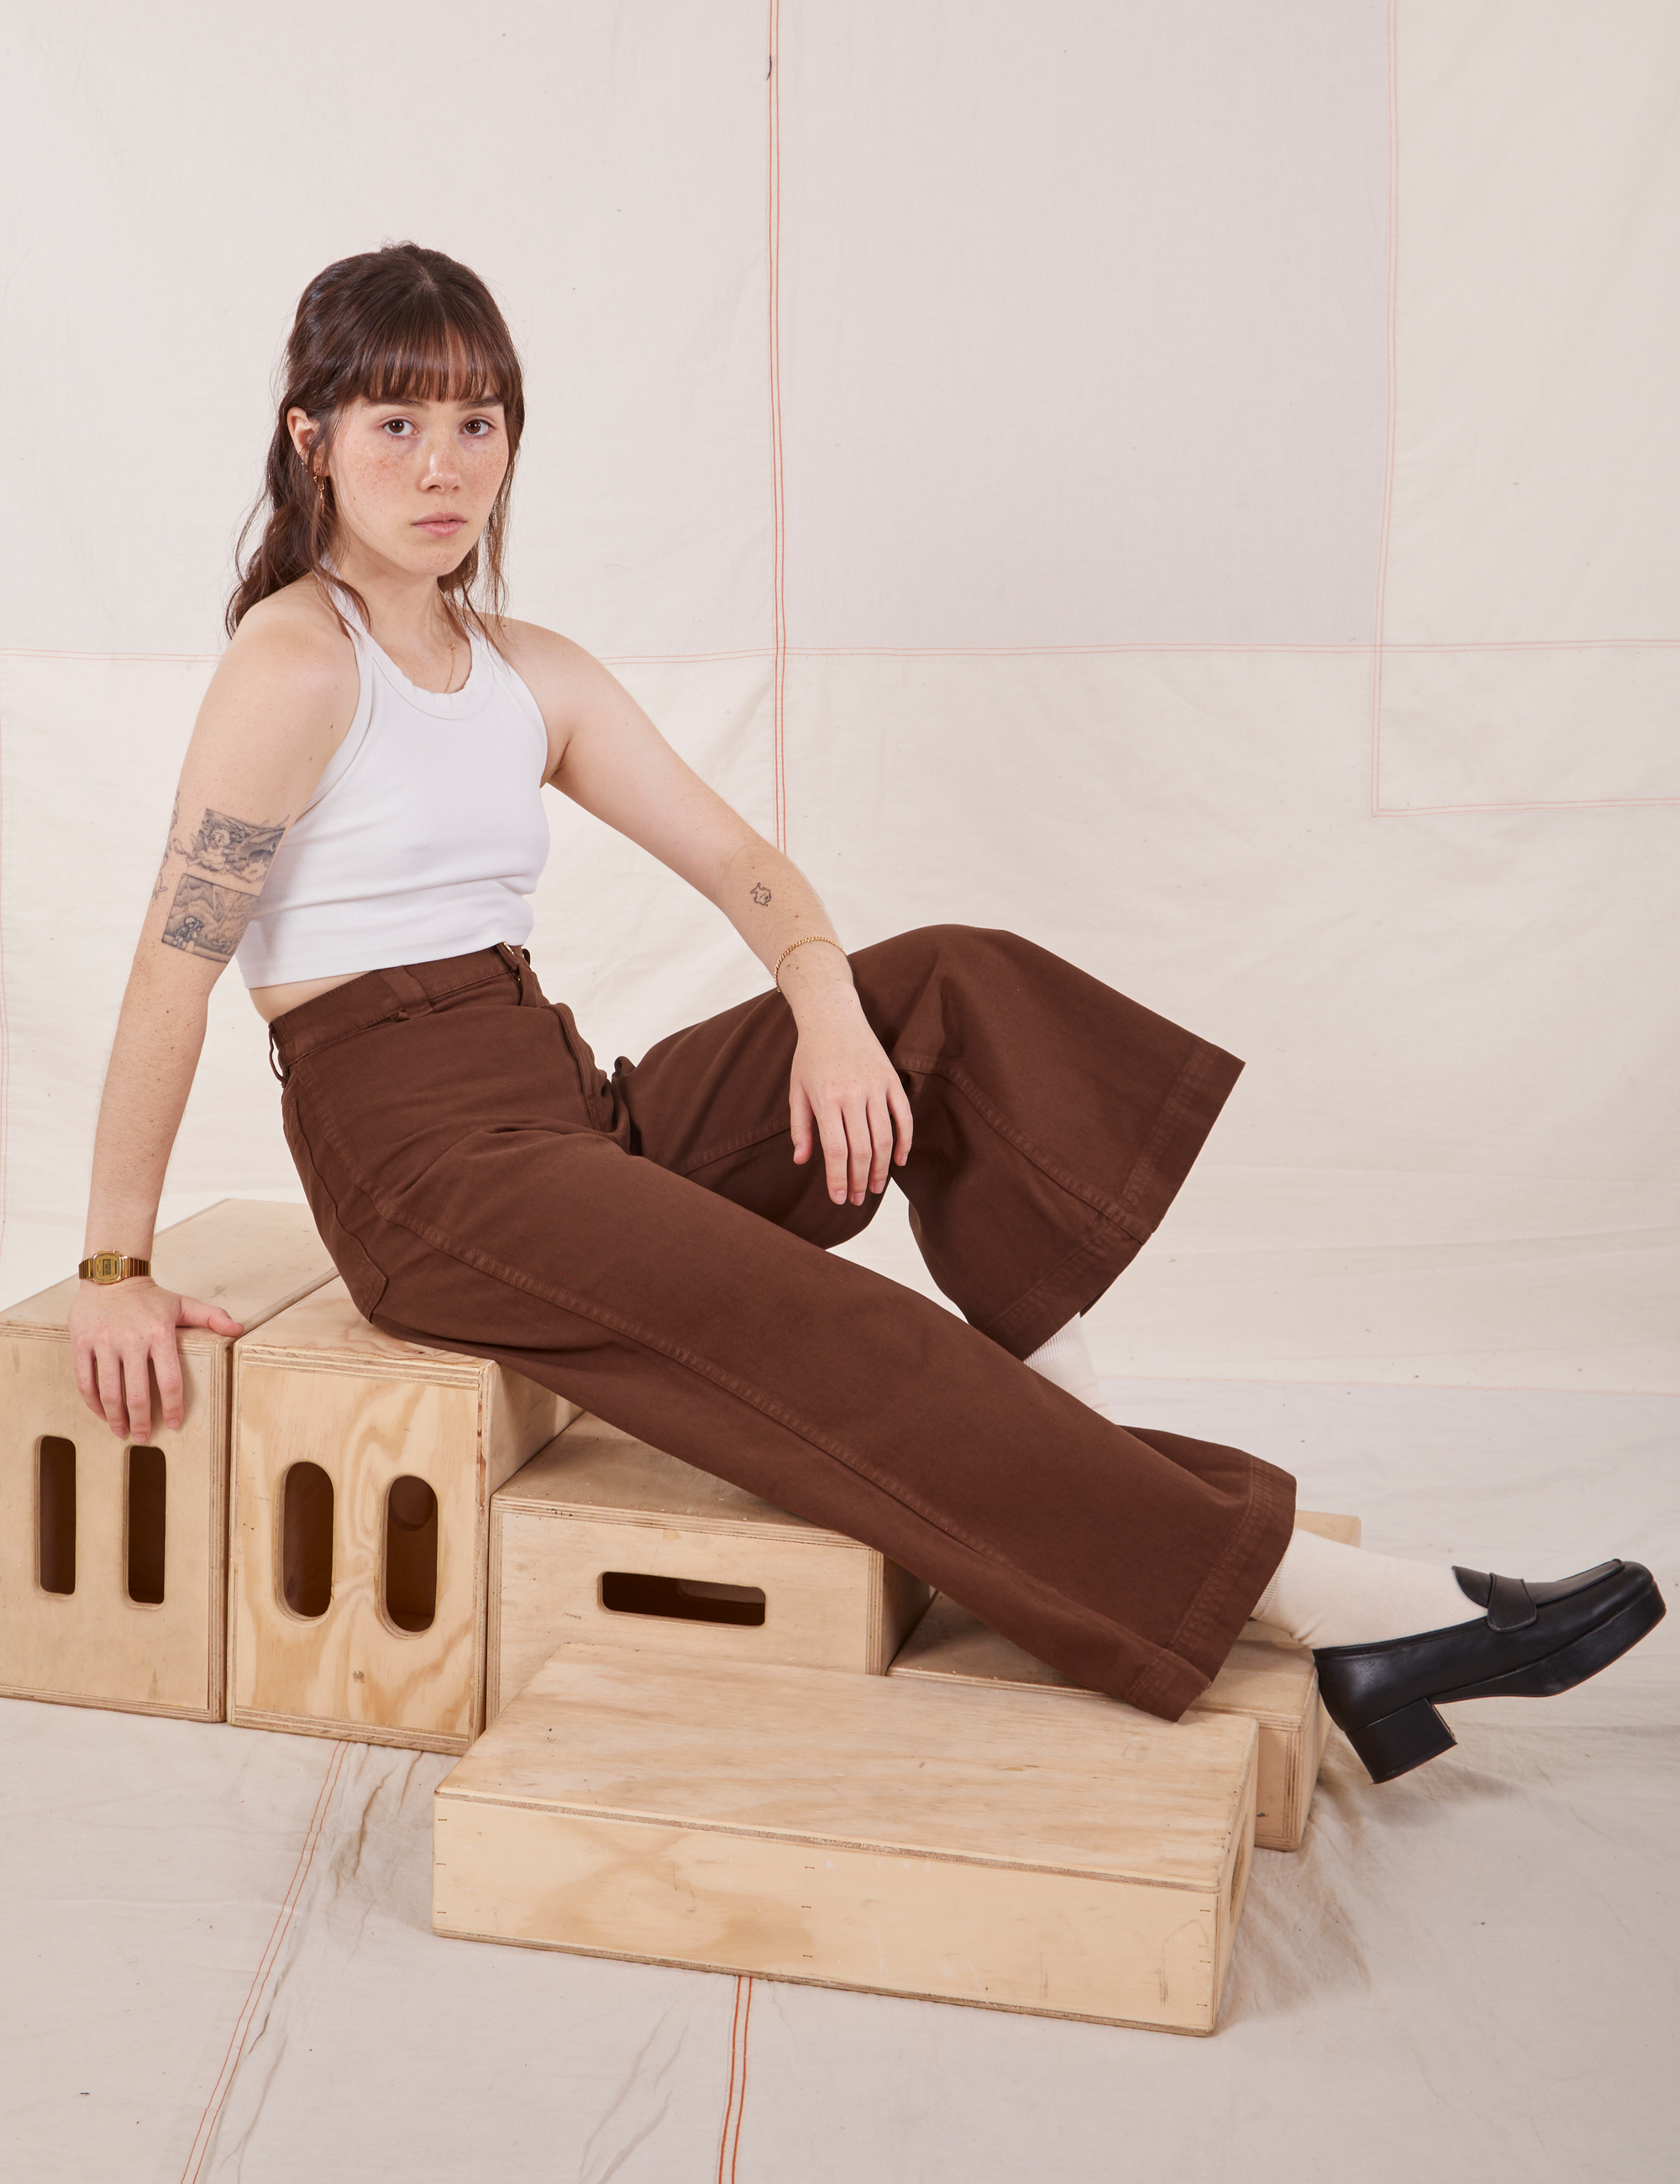 Hana is wearing Petite Bell Bottoms in Fudgesicle Brown and Halter Top in vintage tee off-white